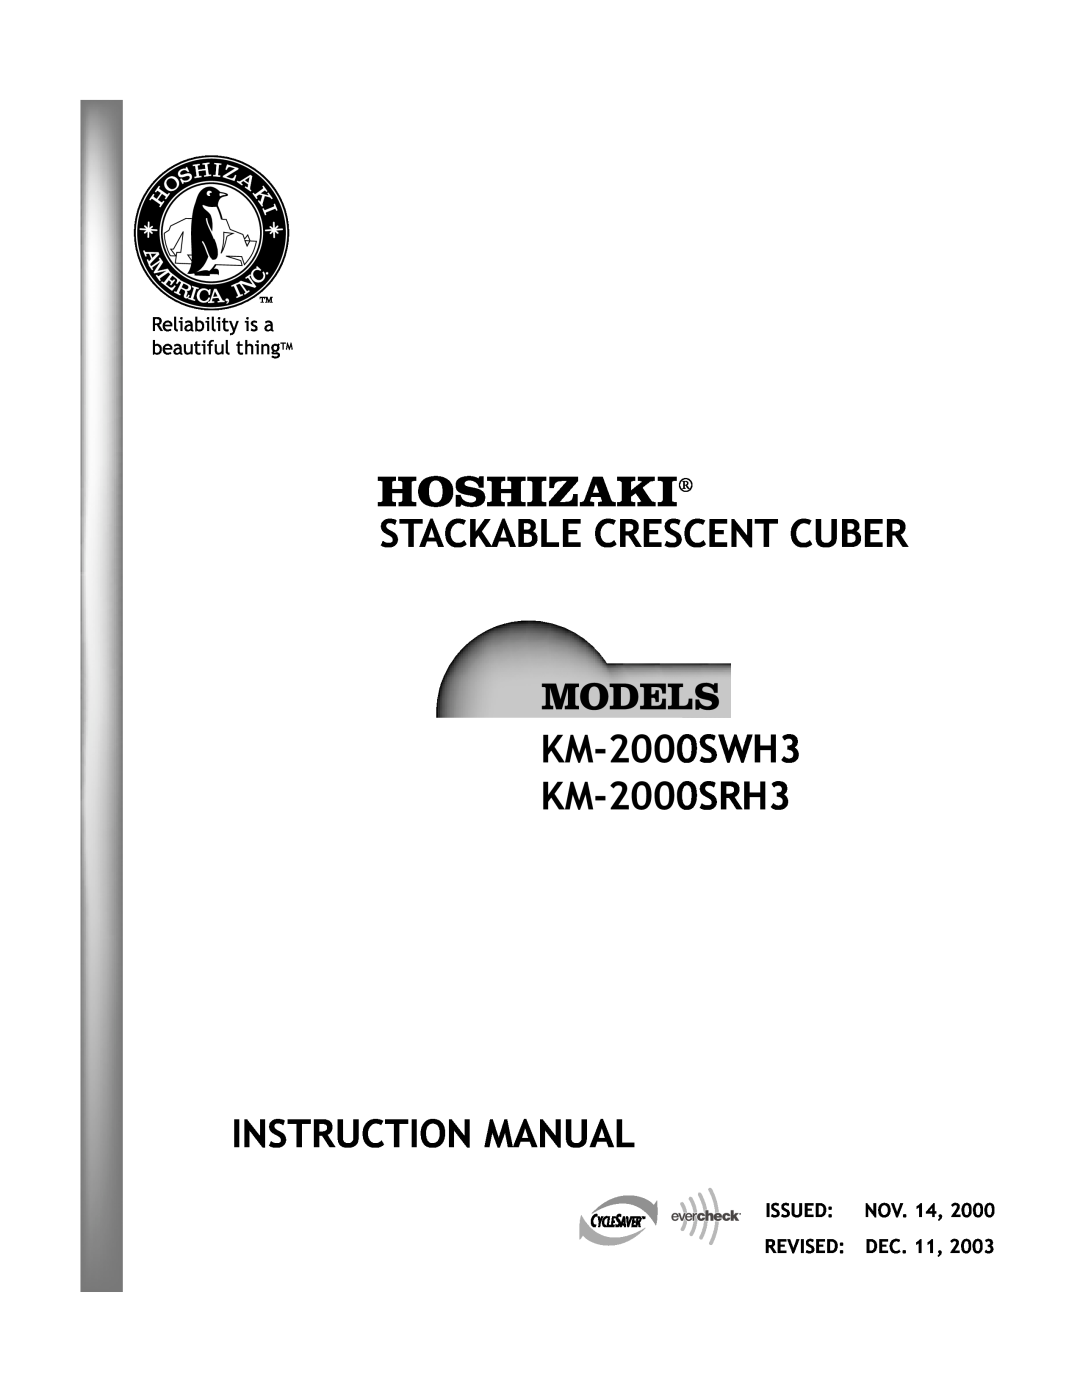 Hoshizaki instruction manual STACKABLE CRESCENT CUBER KM-2000SWH3 KM-2000SRH3, Instruction Manual, Issued, Revised 